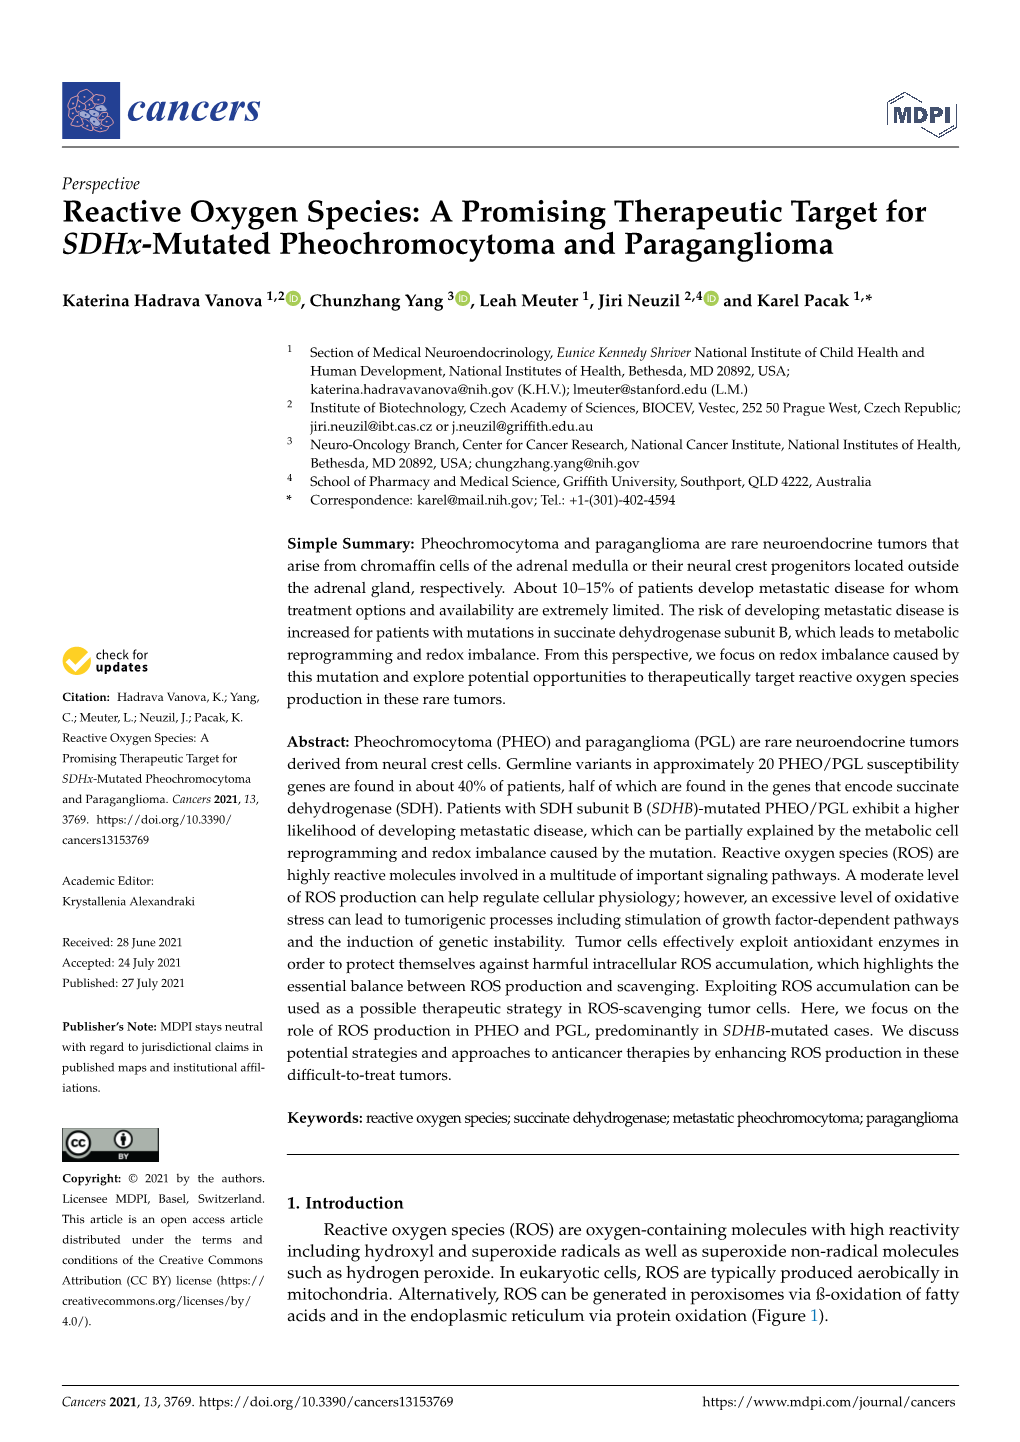 A Promising Therapeutic Target for Sdhx-Mutated Pheochromocytoma and Paraganglioma